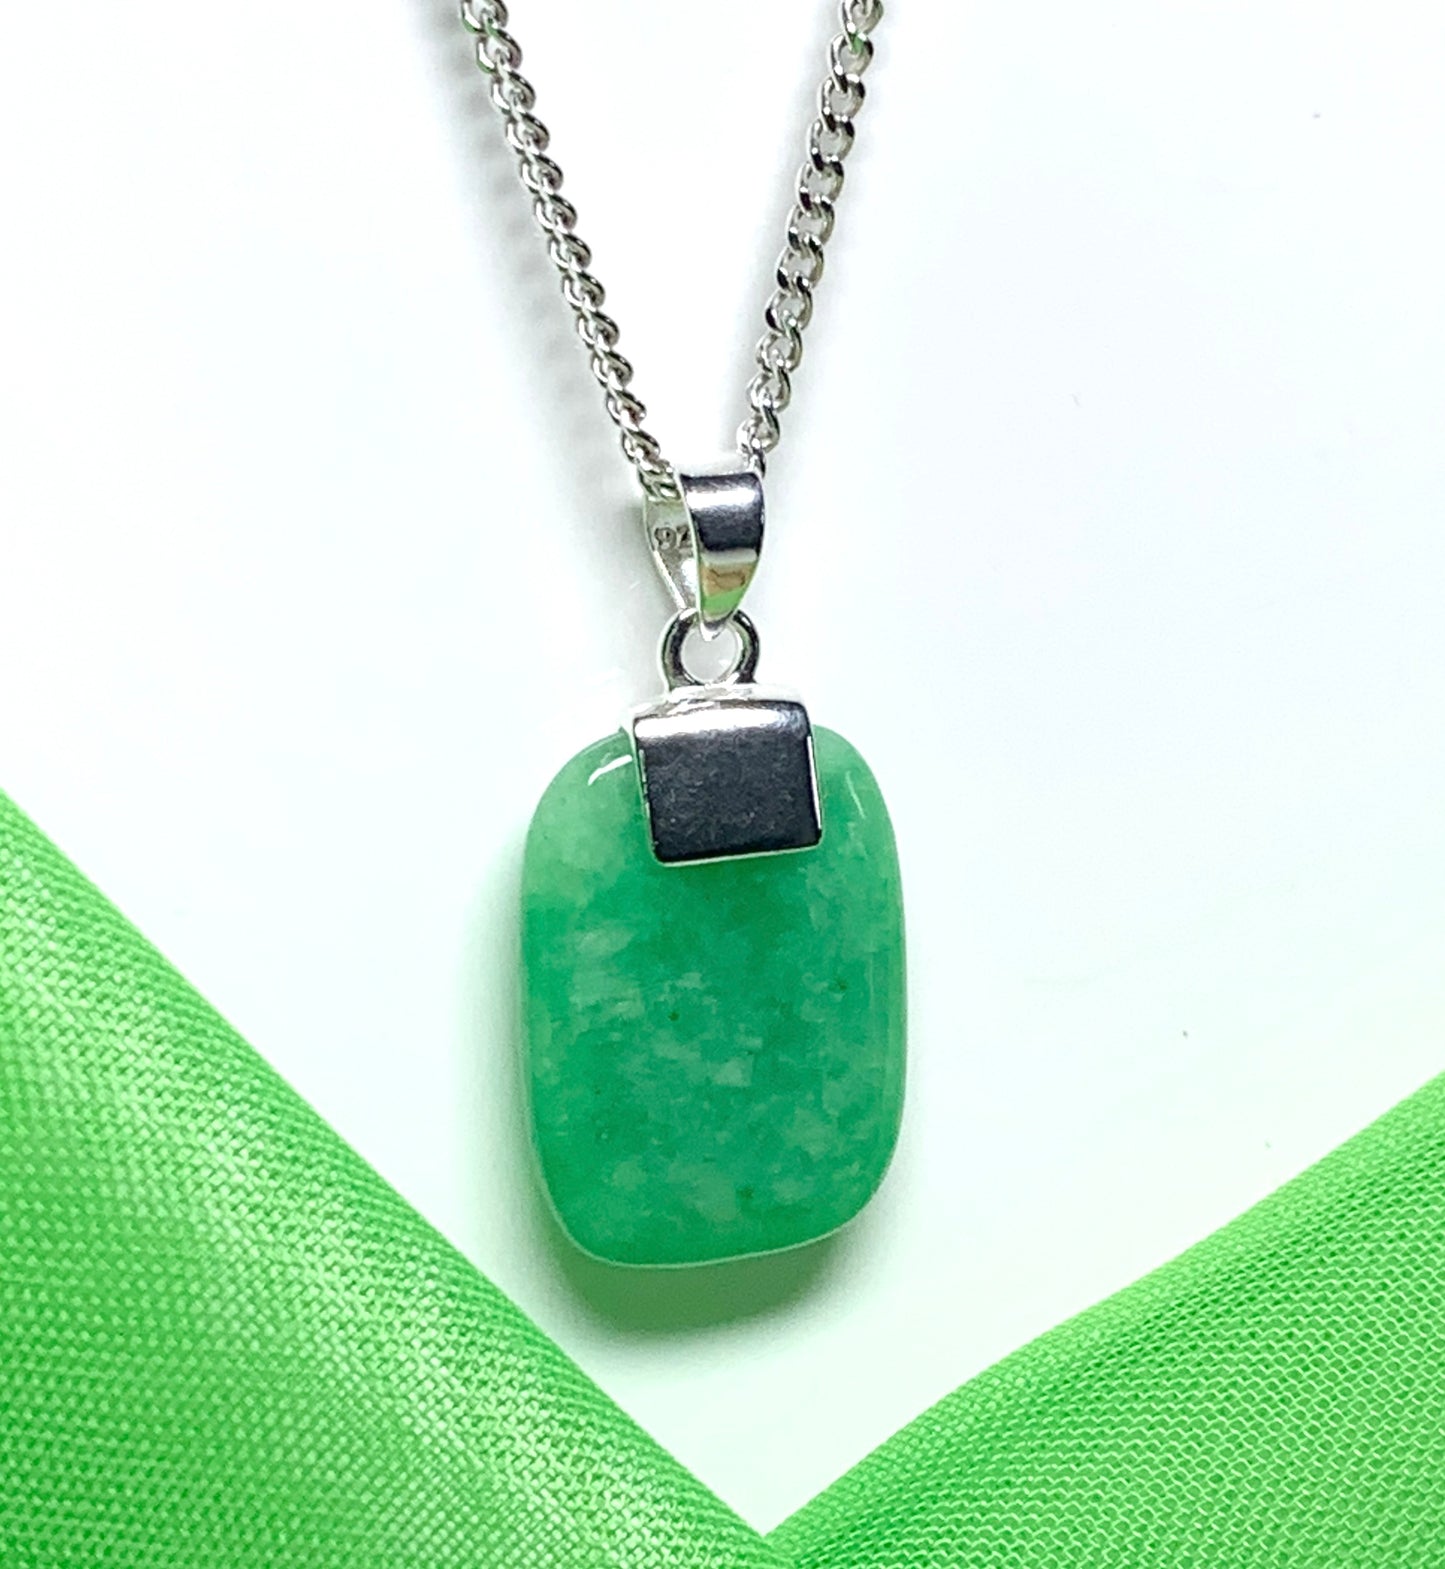 Real green jade necklace cushion shaped stone pendant sterling silver including chain